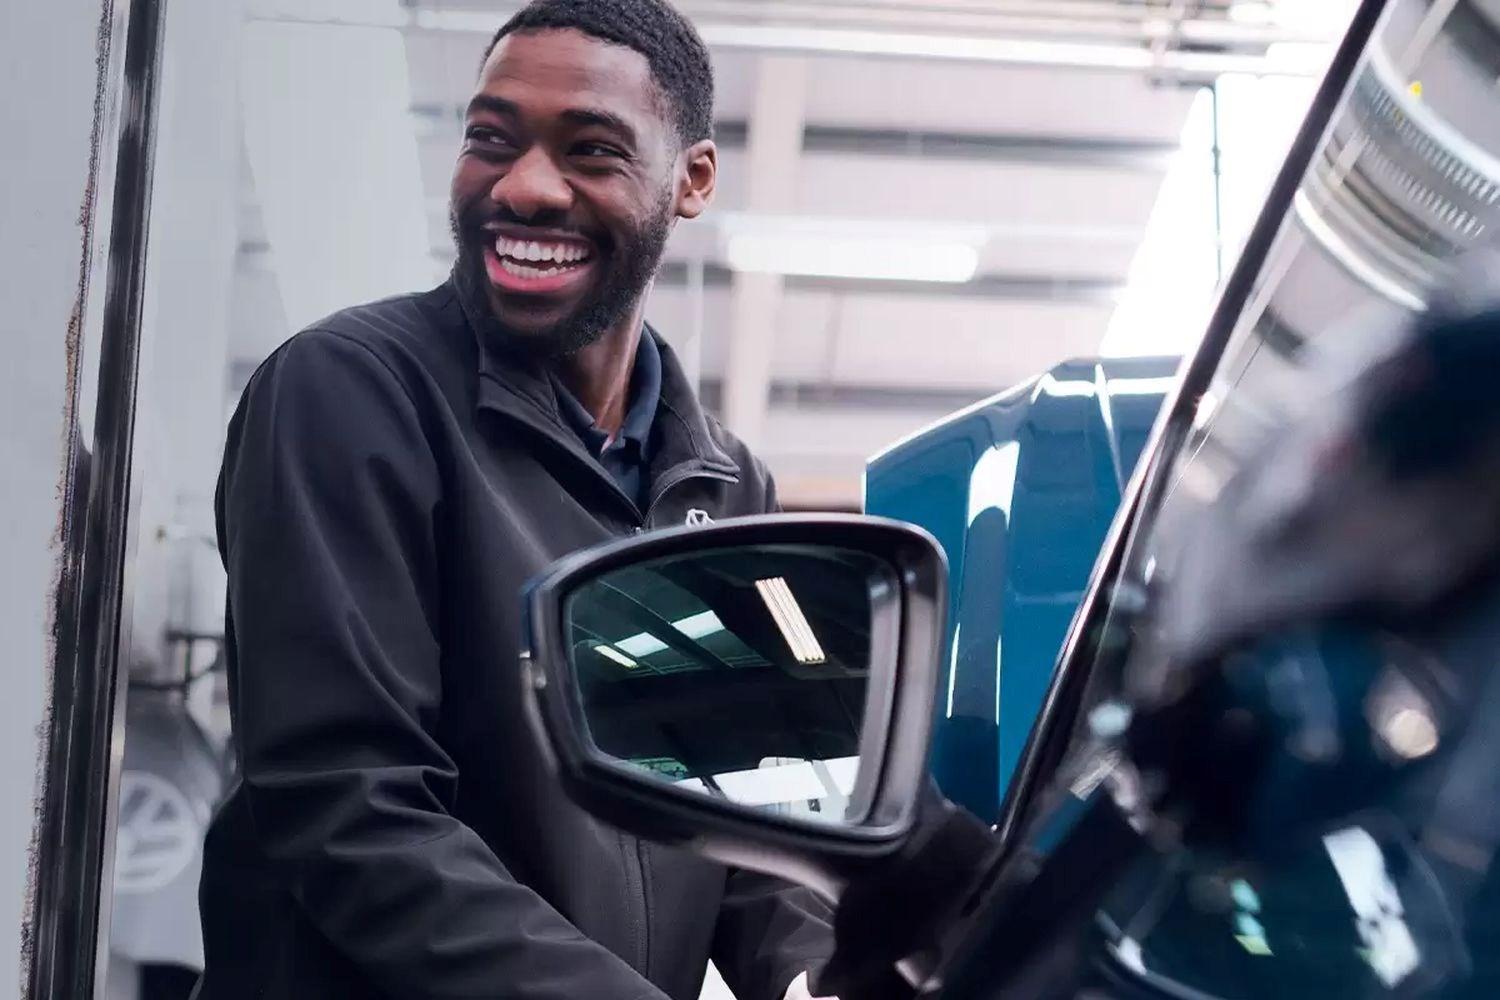 Volkswagen Service Specialist smiles while checking under the hood of a Volkswagen Tiguan during service at the Volkswagen Approved Accident Repair Centre, Agnew Volkswagen Mallusk